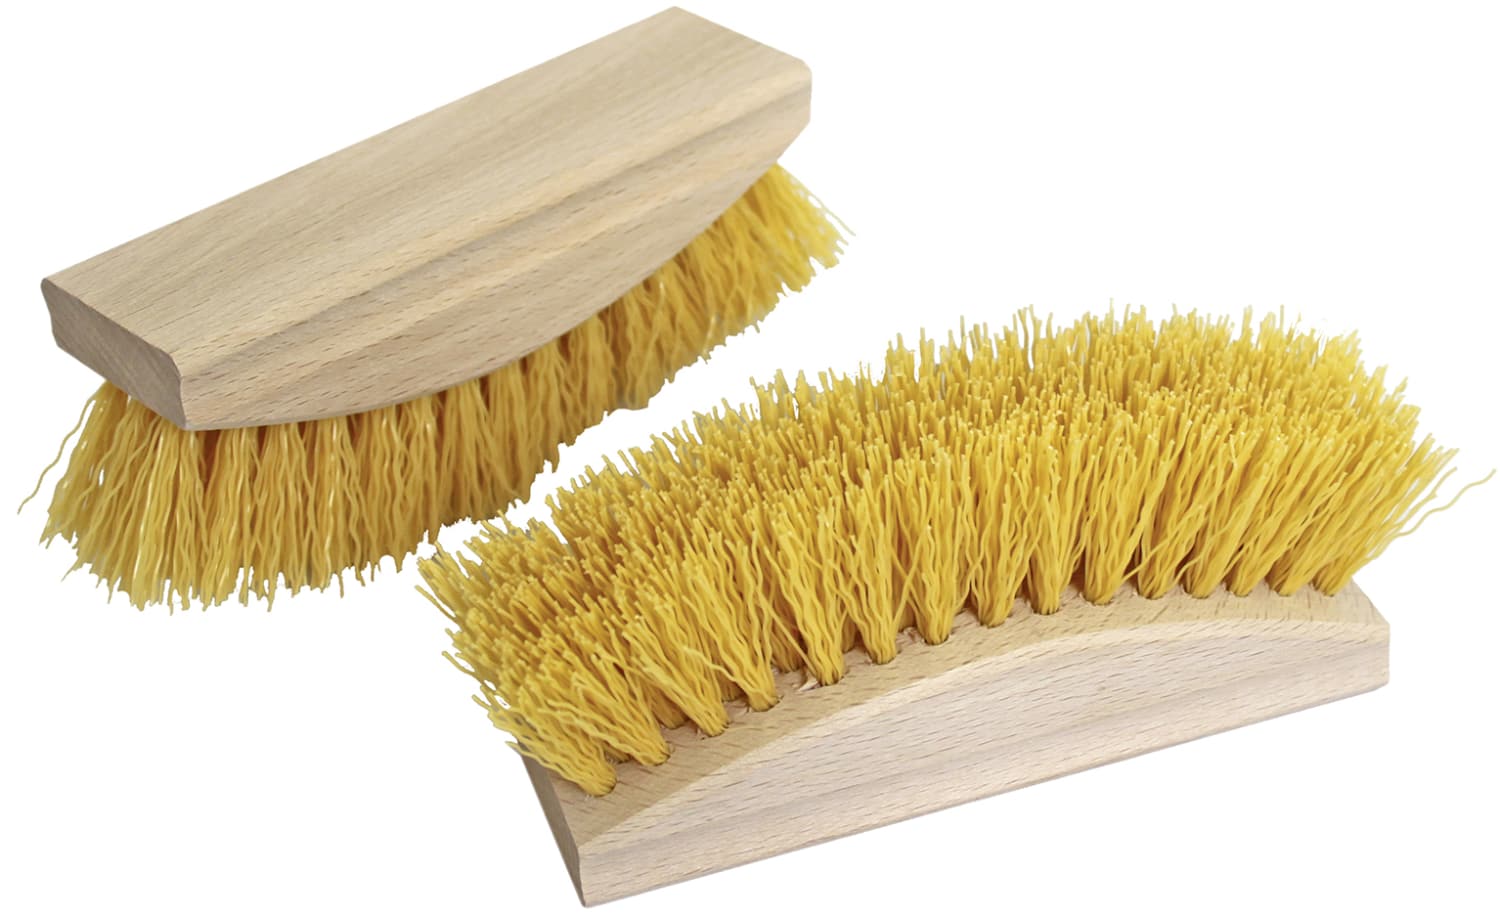 Cleaning brush for bread proofing baskets 201907